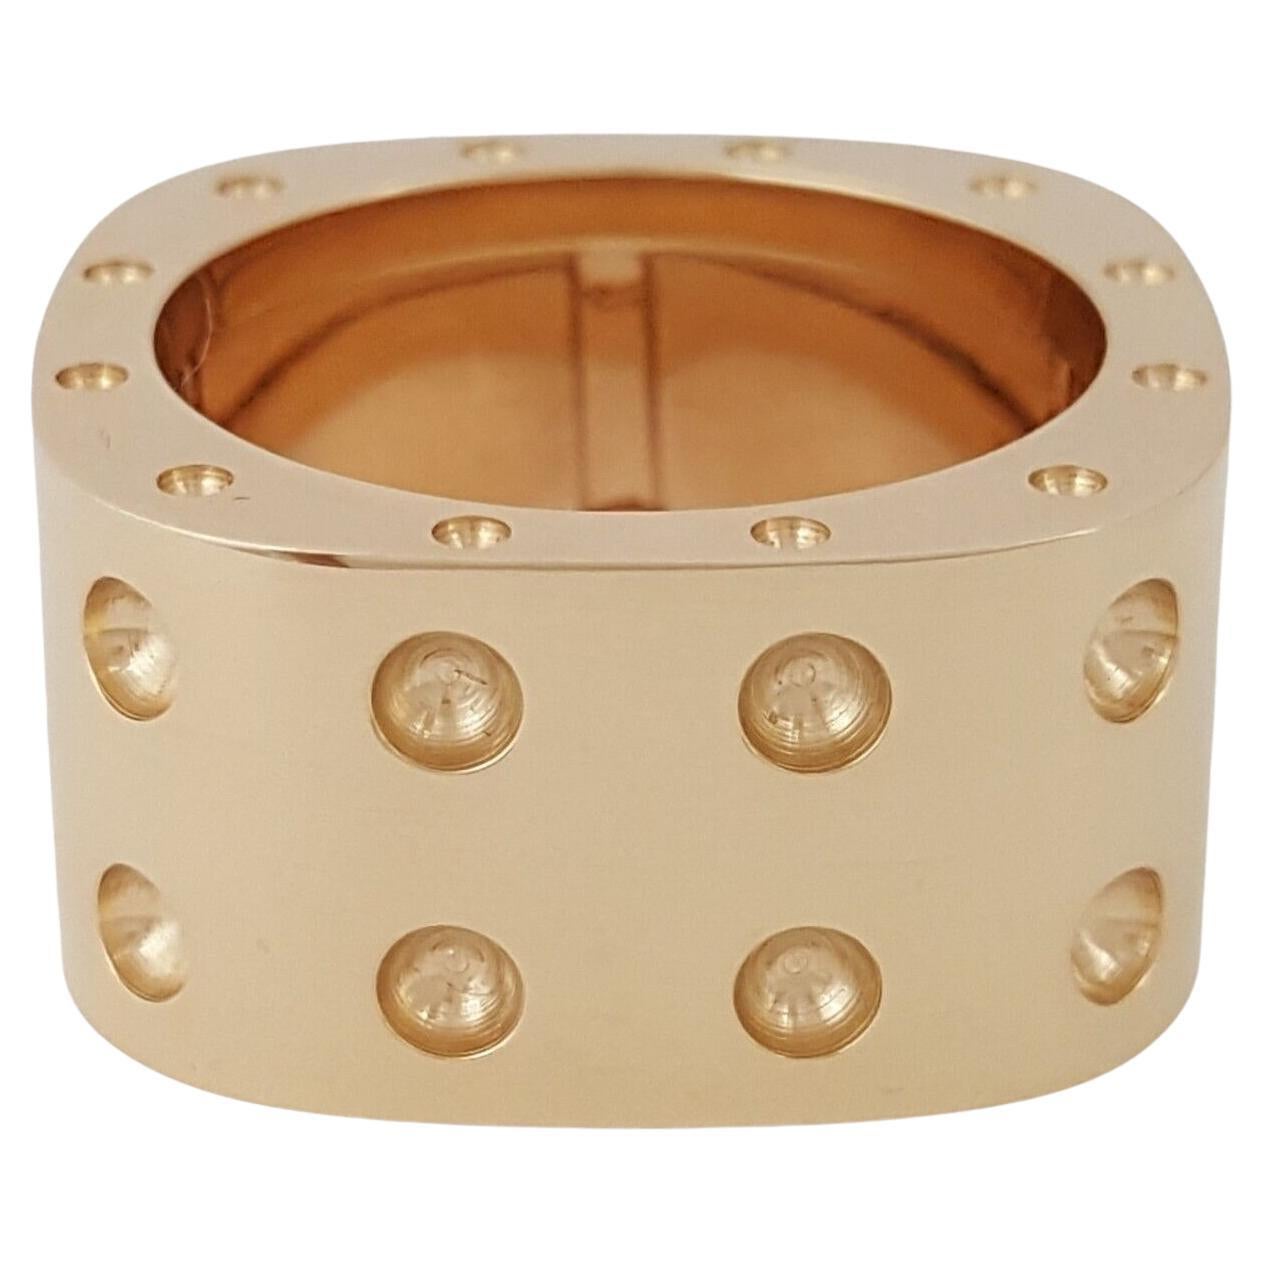 Roberto Coin 18K Gelbgold Pois Moi Double Row Statement Ring im Angebot